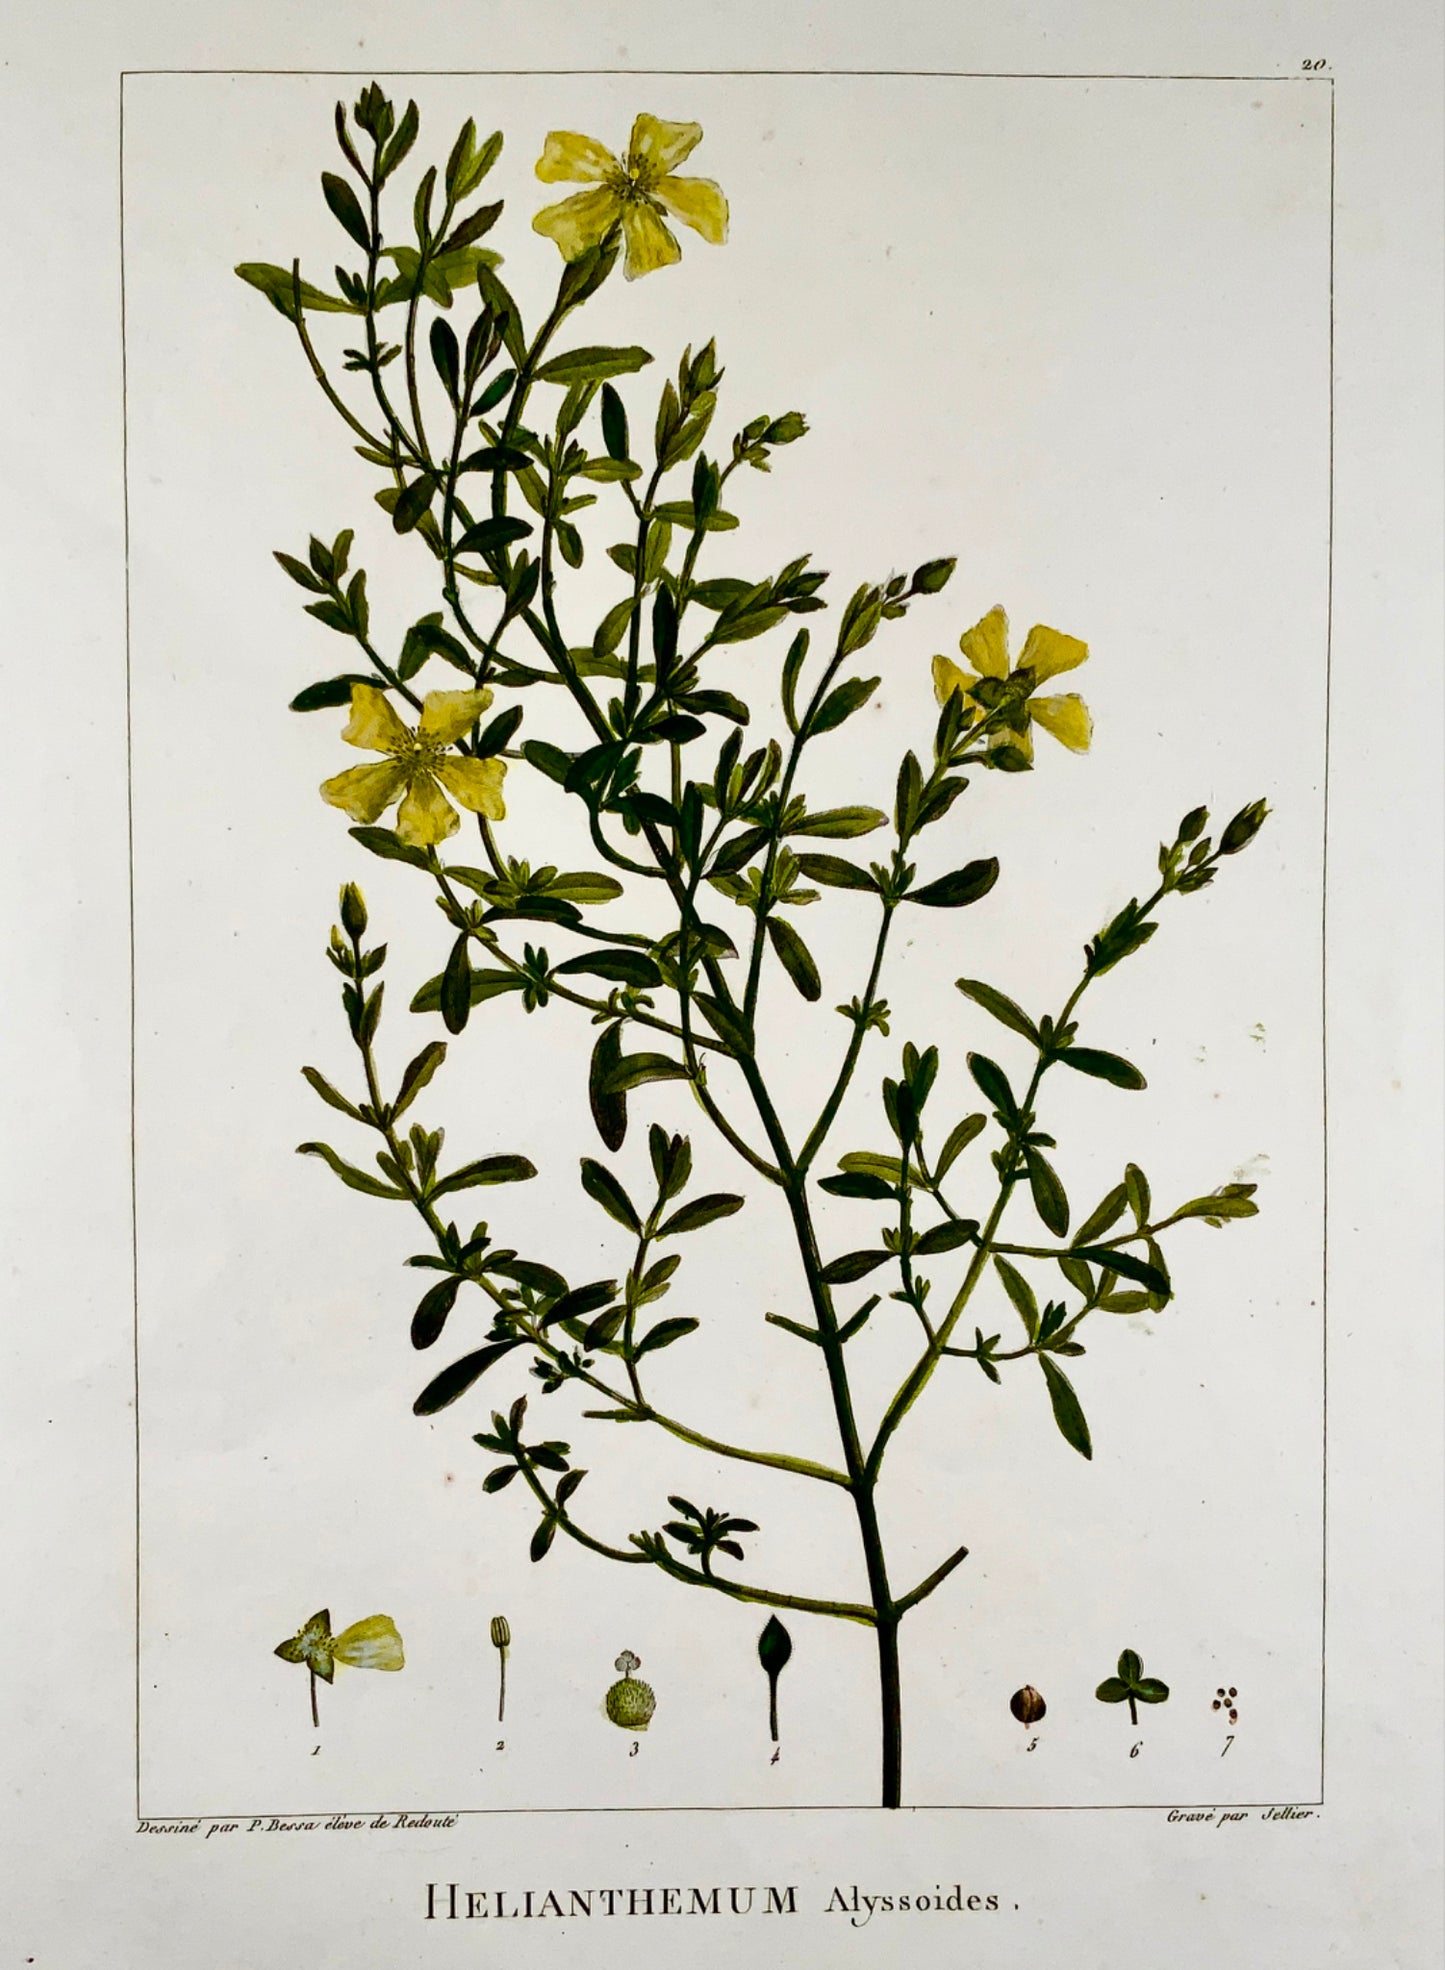 1803 Sellier after Bessa and Redoute - SUNROSE 51 x 34 cm. Hand coloured - Botany